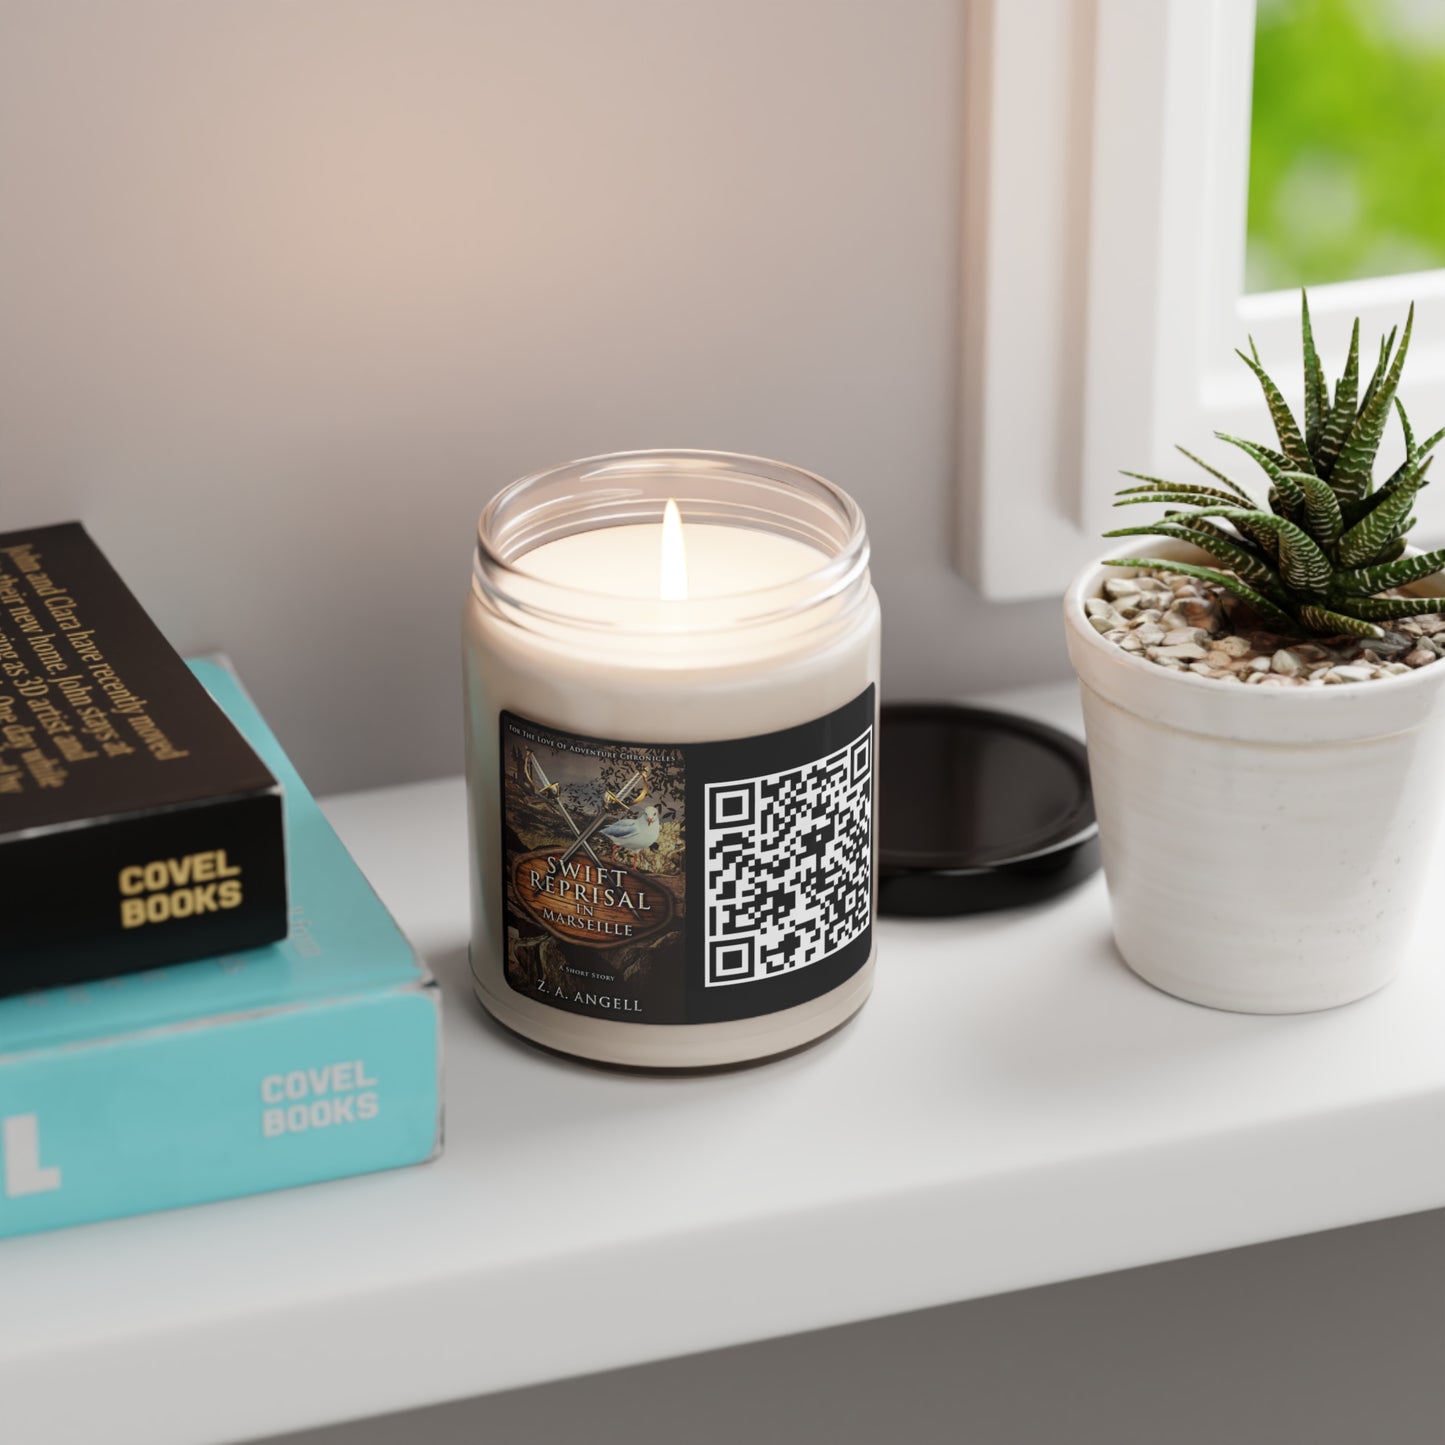 Swift Reprisal In Marseille - Scented Soy Candle